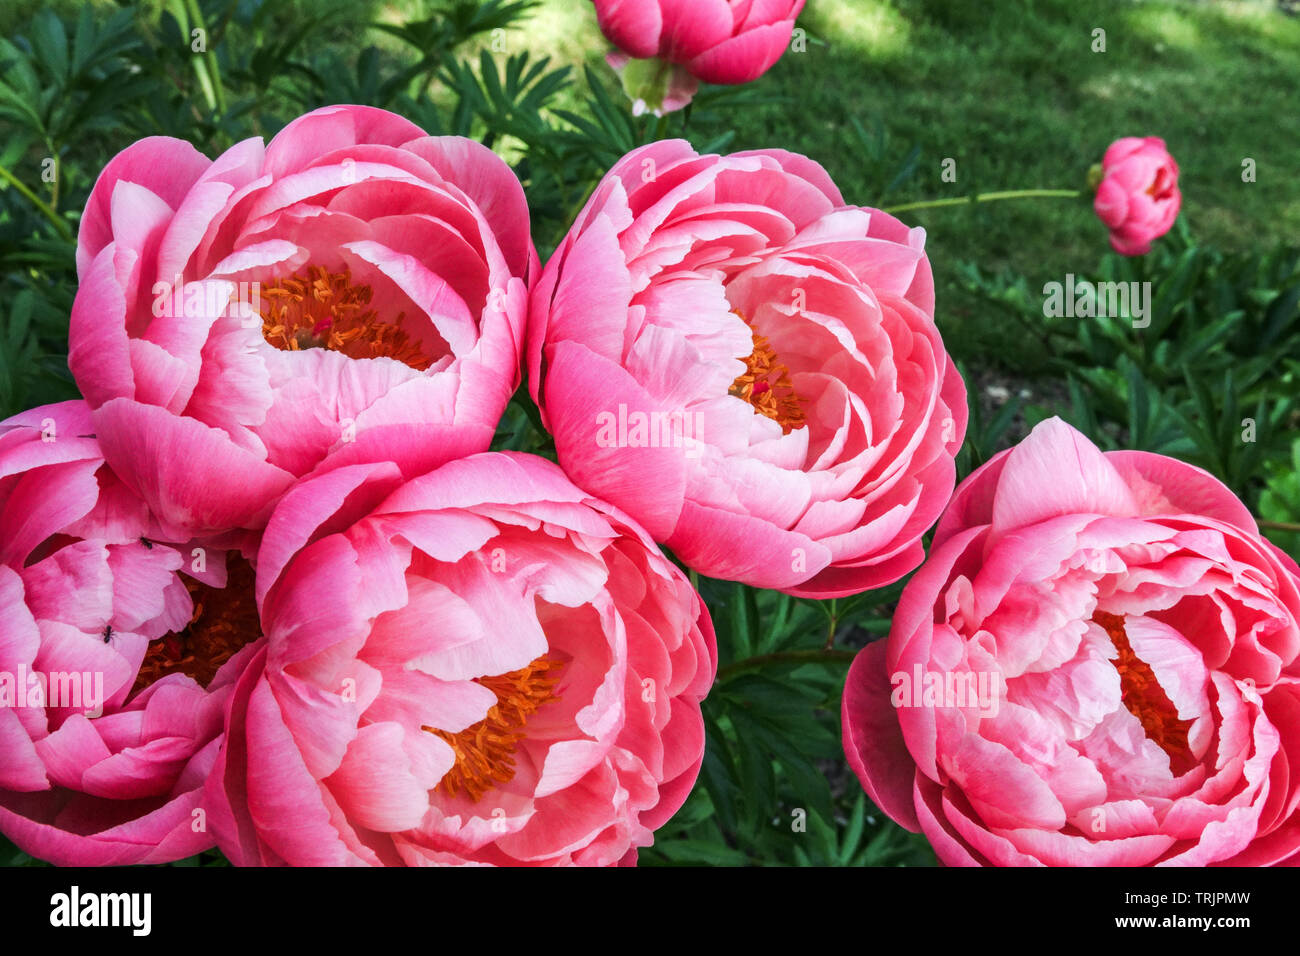 Pretty Pink peony flowers, Peony flowers 'Coral Charm' Herbaceous peonies in garden Stock Photo